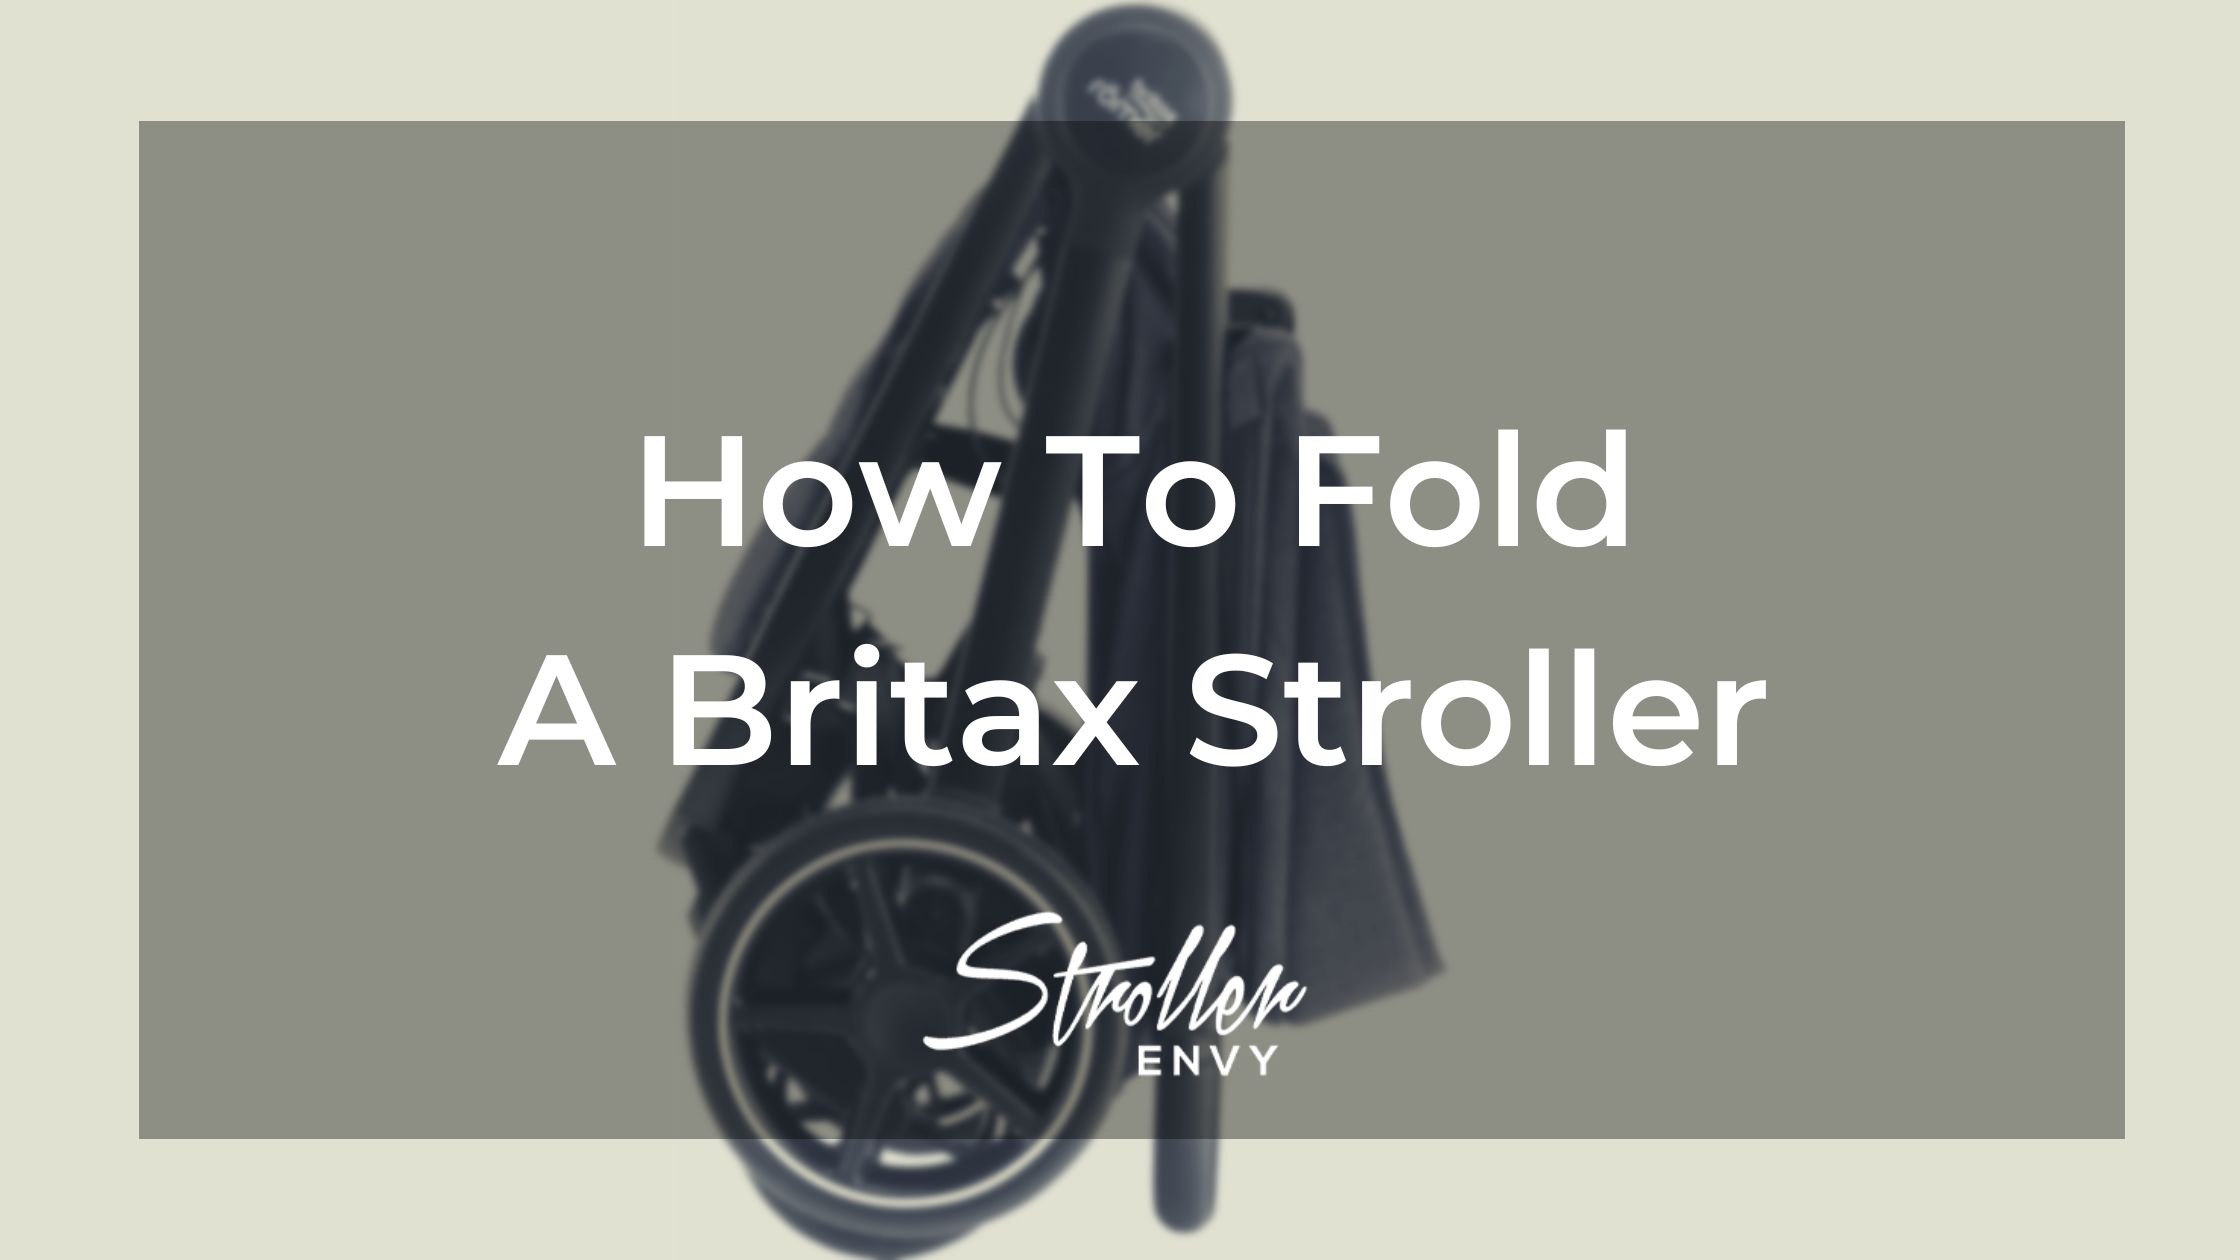 How To Fold A Britax Stroller